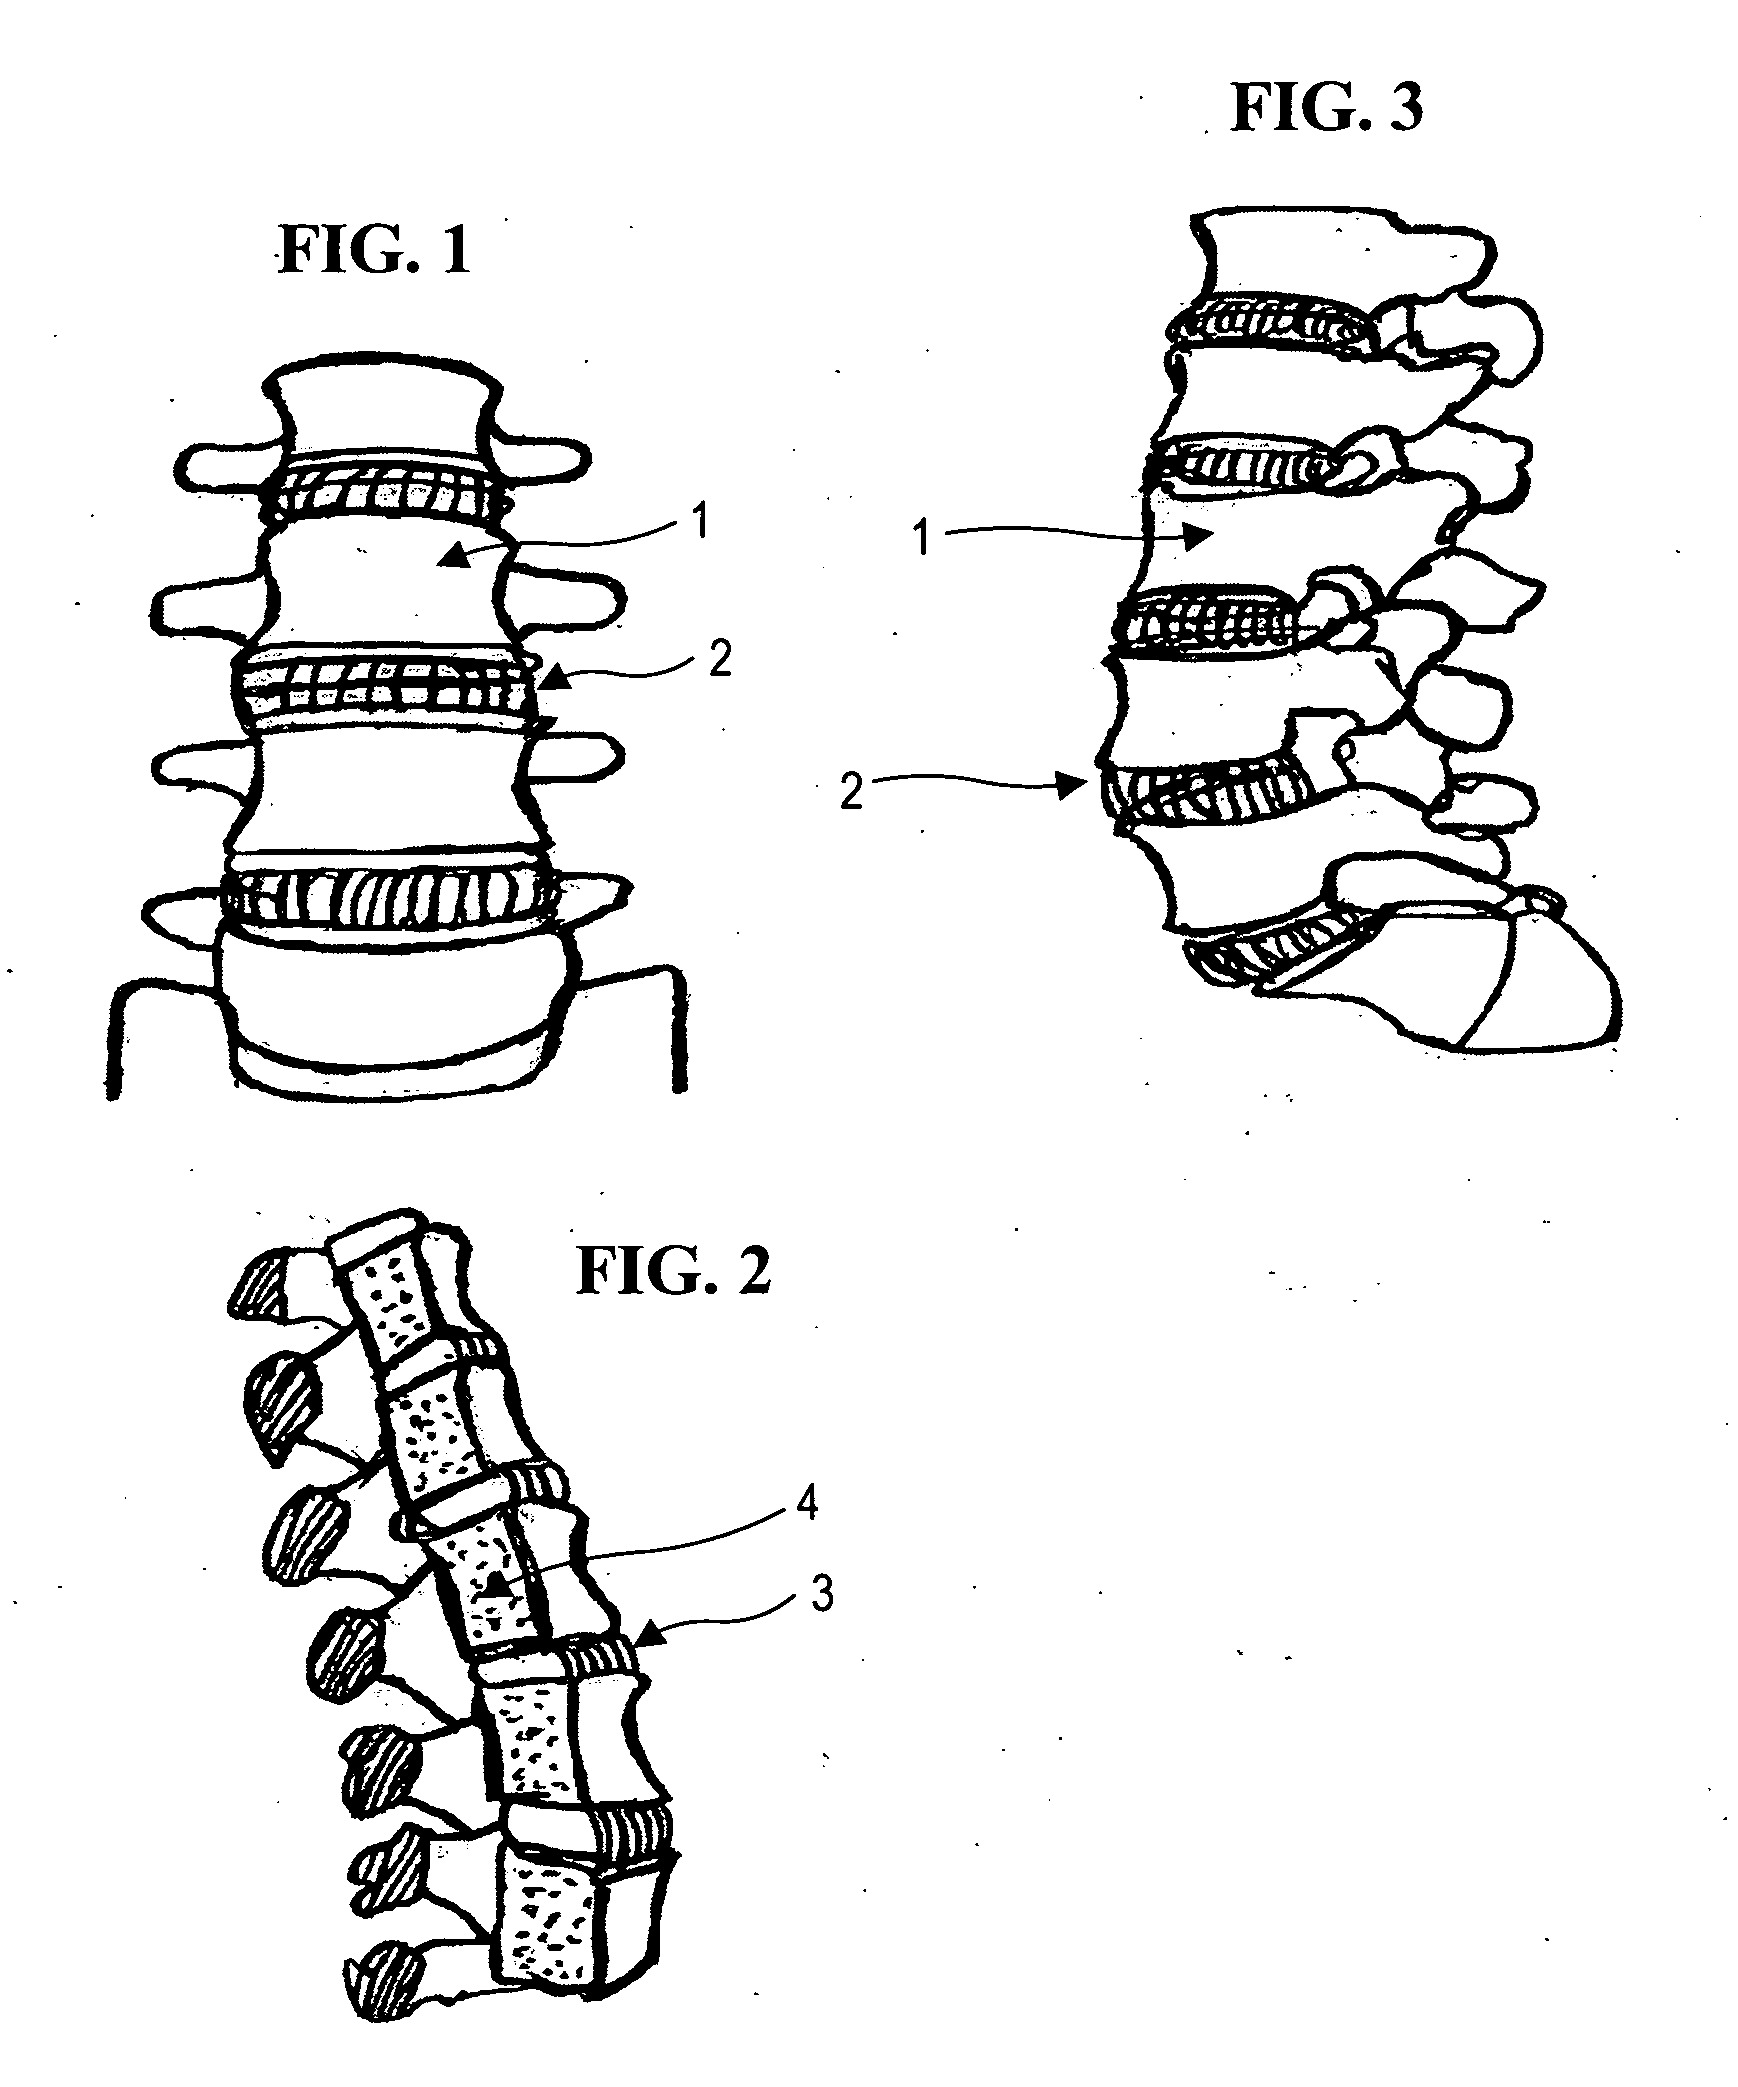 Apparatus and method for anterior intervertebral spinal fixation and fusion